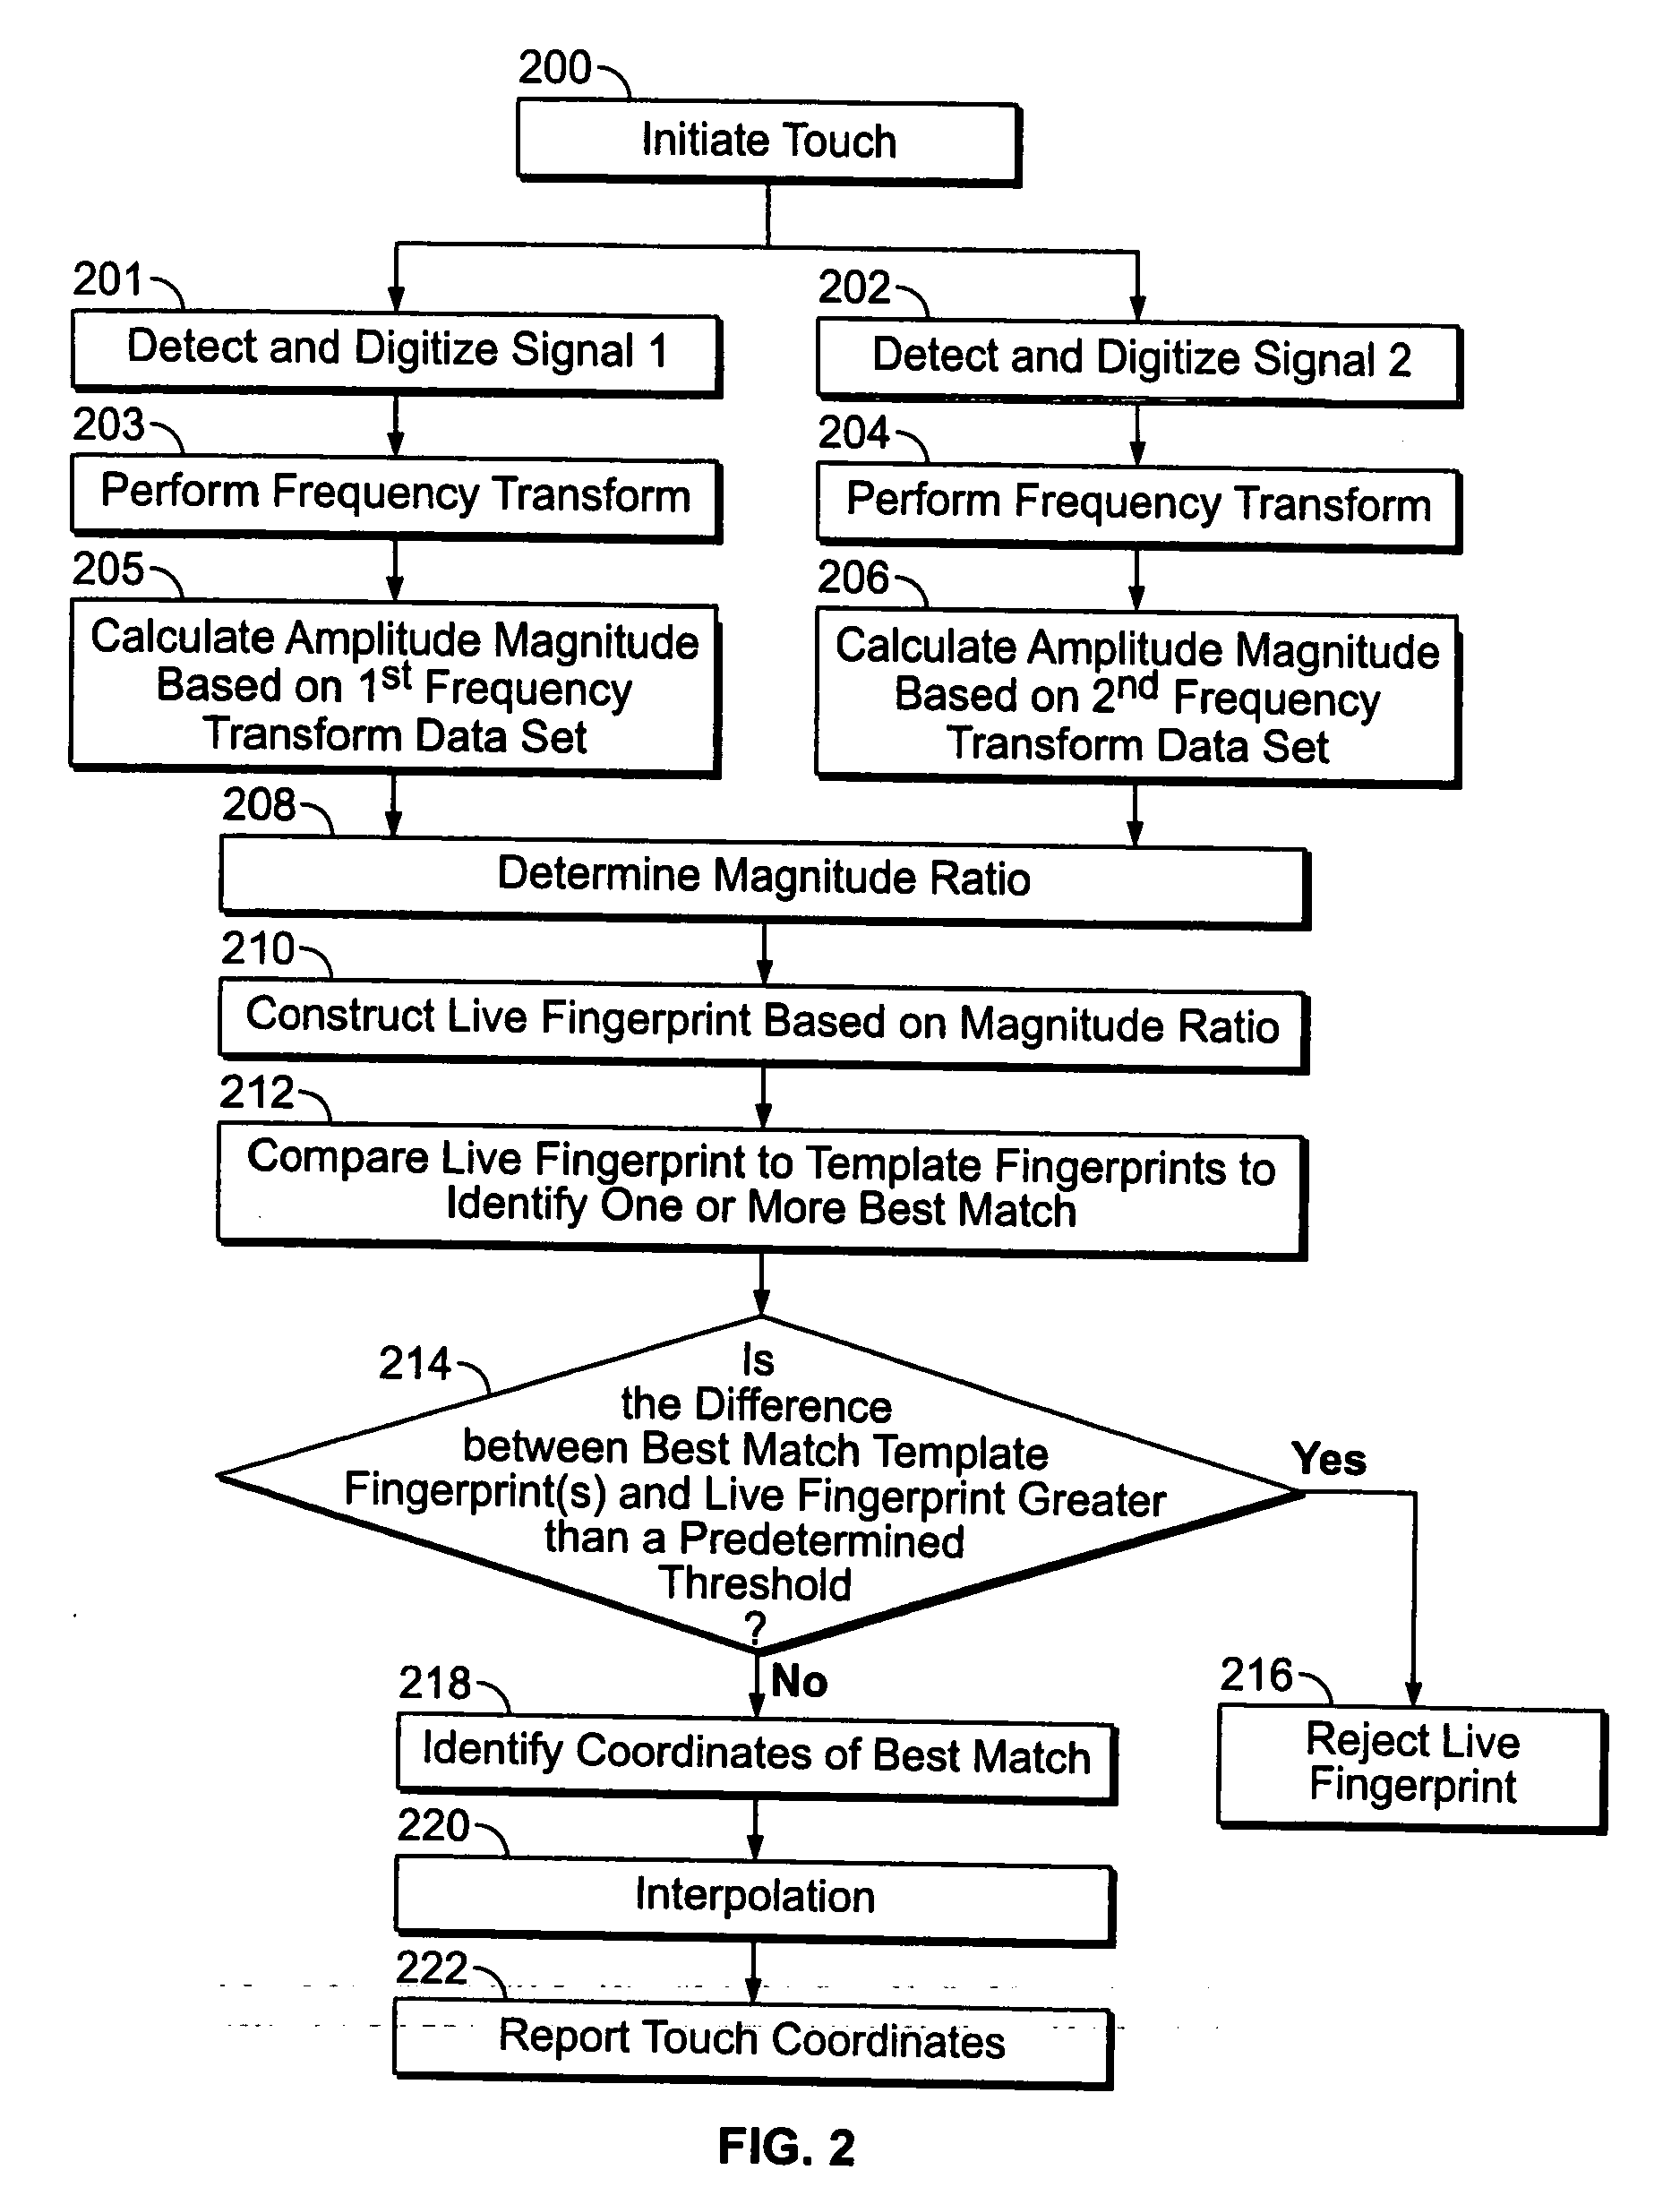 Method and system for detecting touch events based on magnitude ratios